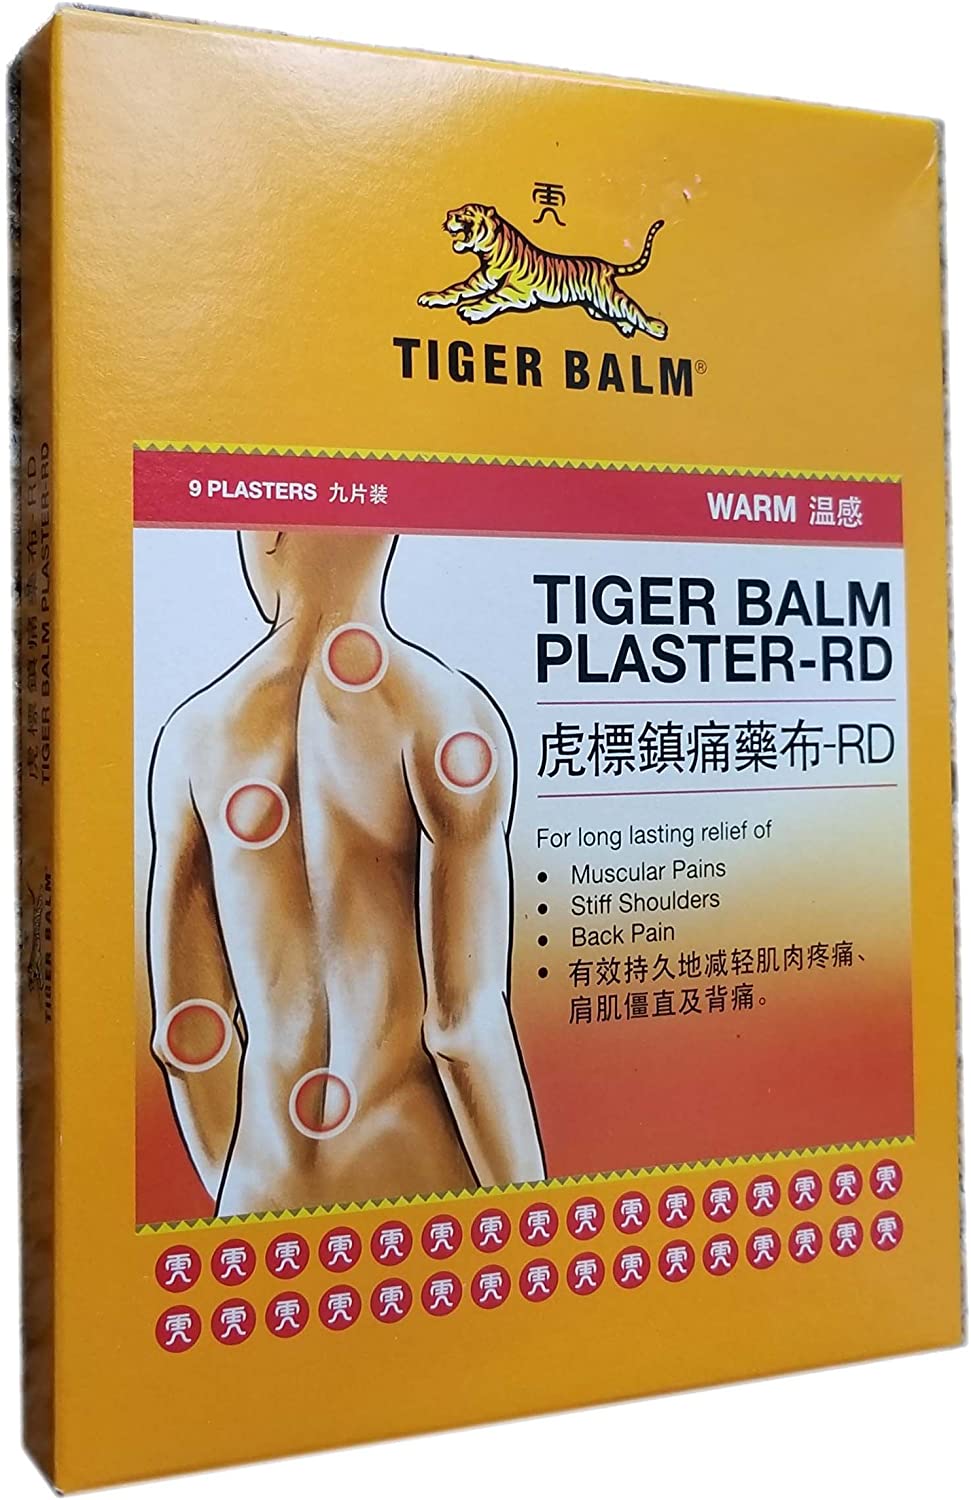 Tiger Balm Plaster Red Warm (Pain Relief) 10x14 cm 9 Plasters